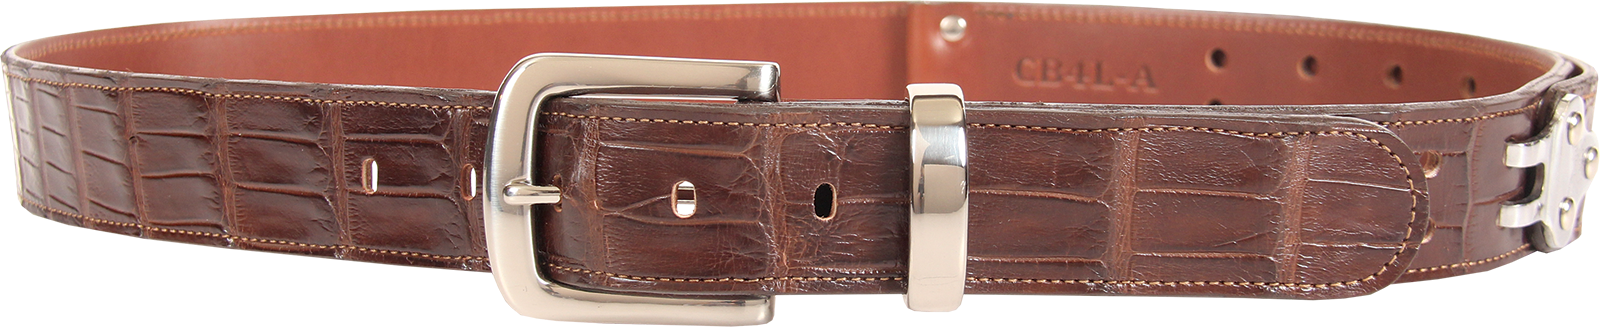 Brown American Alligator leather belt for men size large with a nickel front buckle